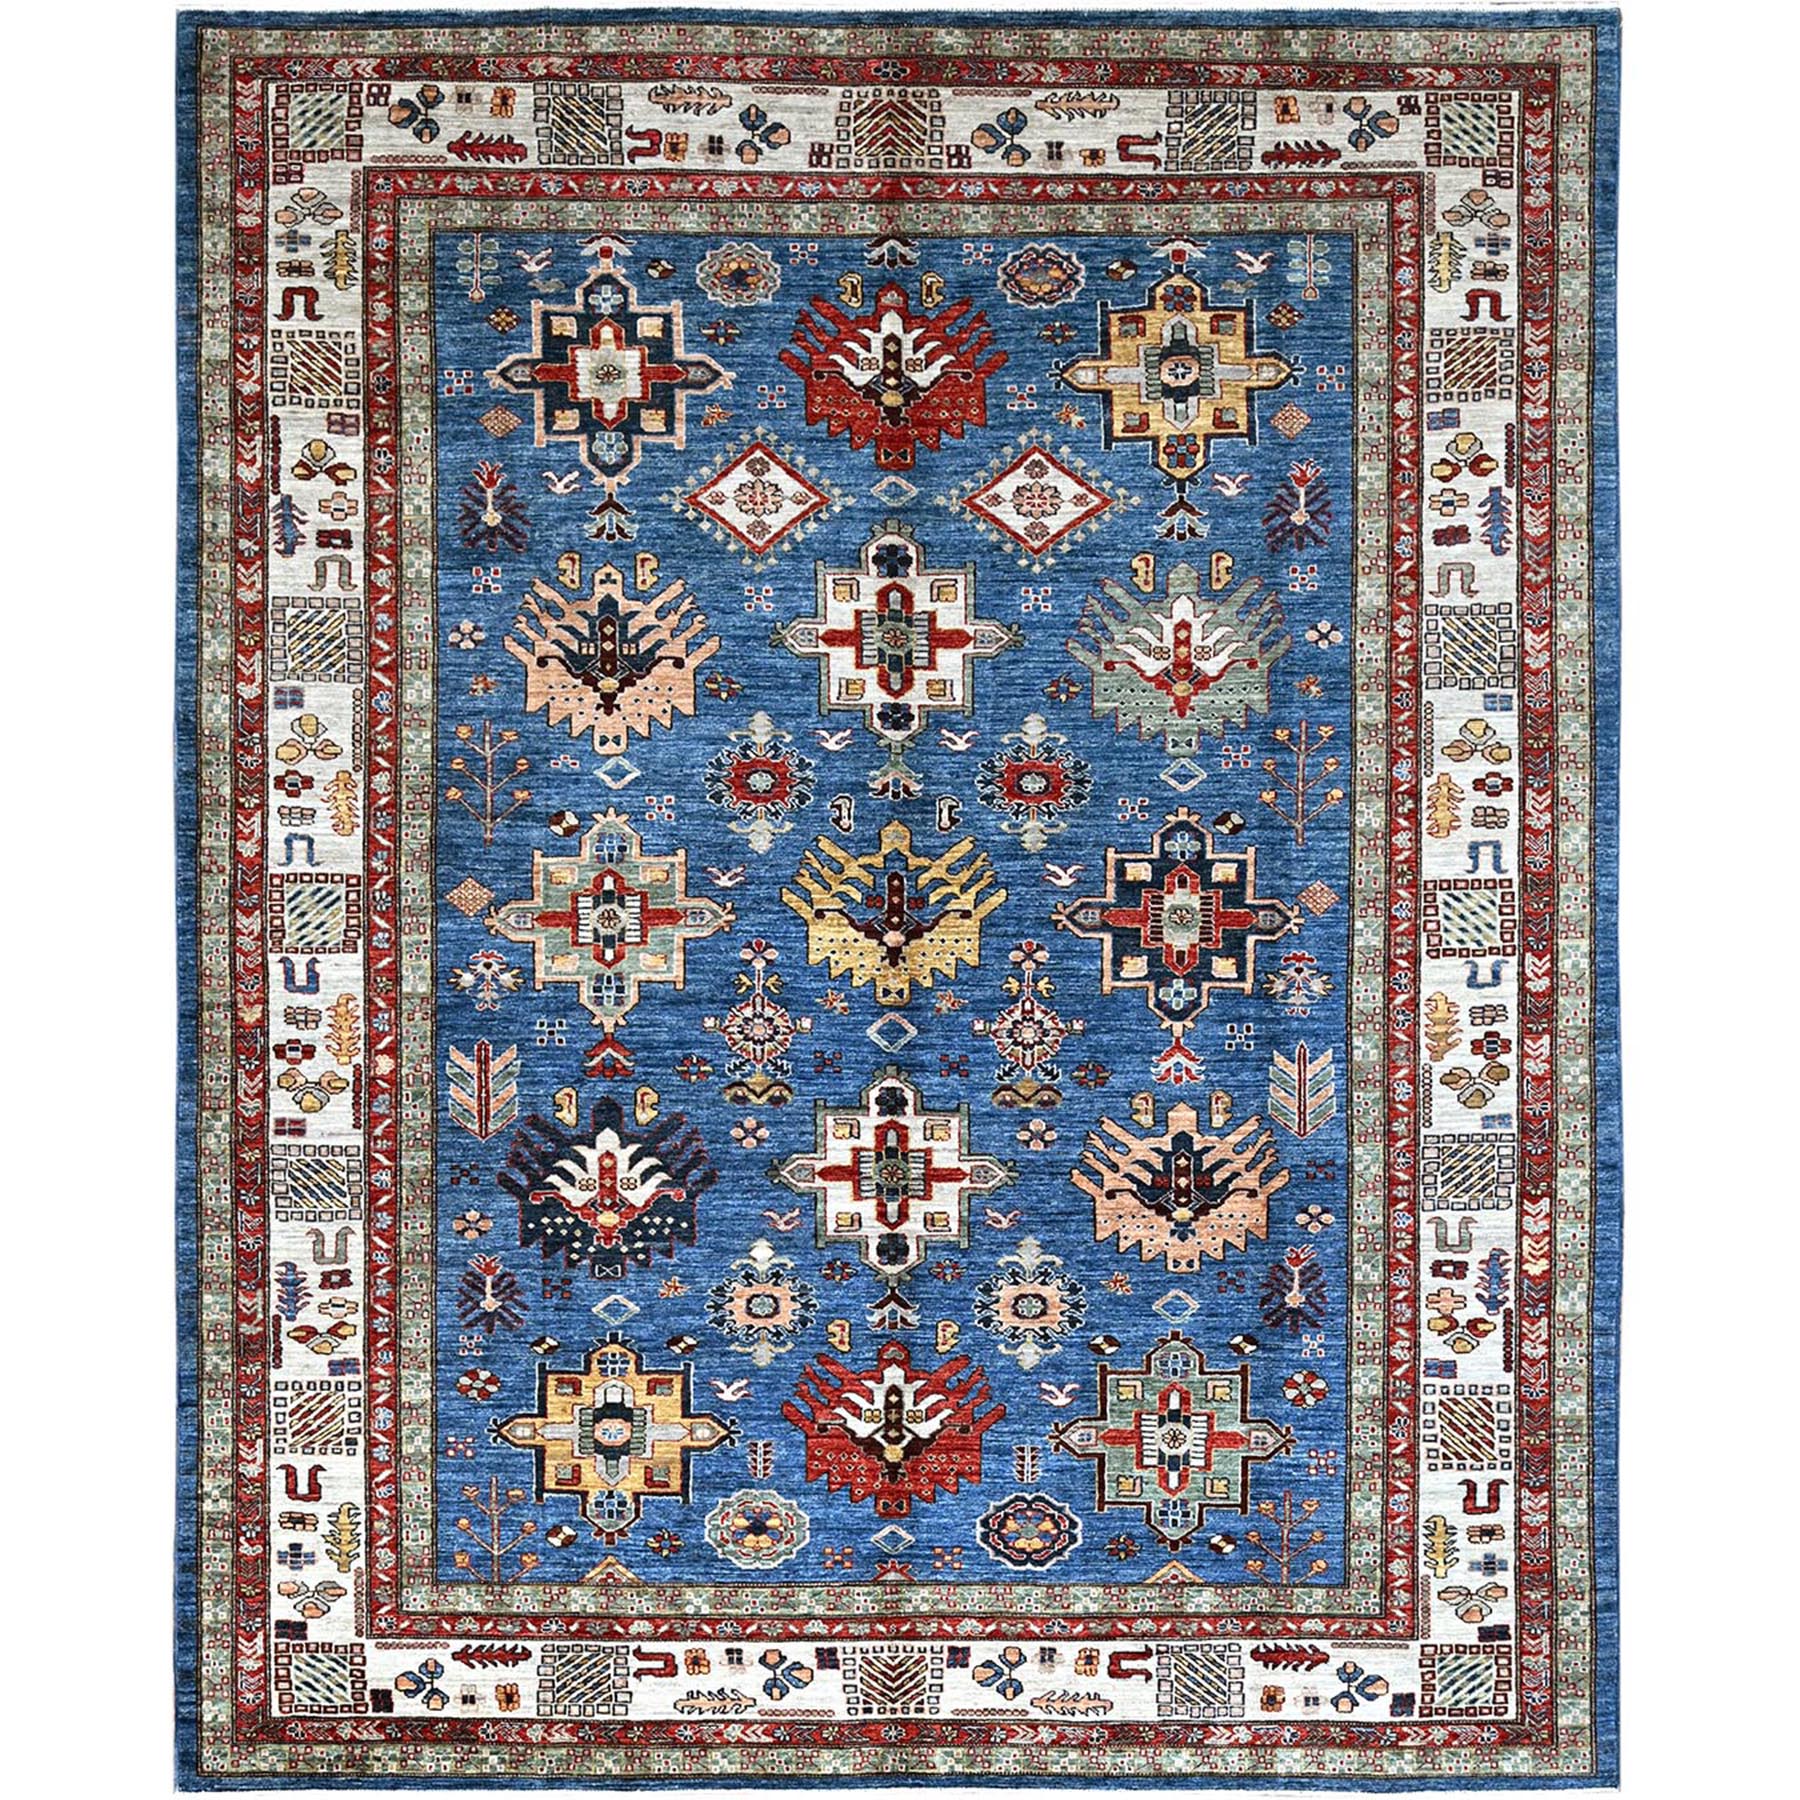 Cerulean Blue, Densely Woven Extra Soft Wool, Hand Knotted Afghan Super Kazak with Geometric Medallions, Natural Dyes, Oriental Rug